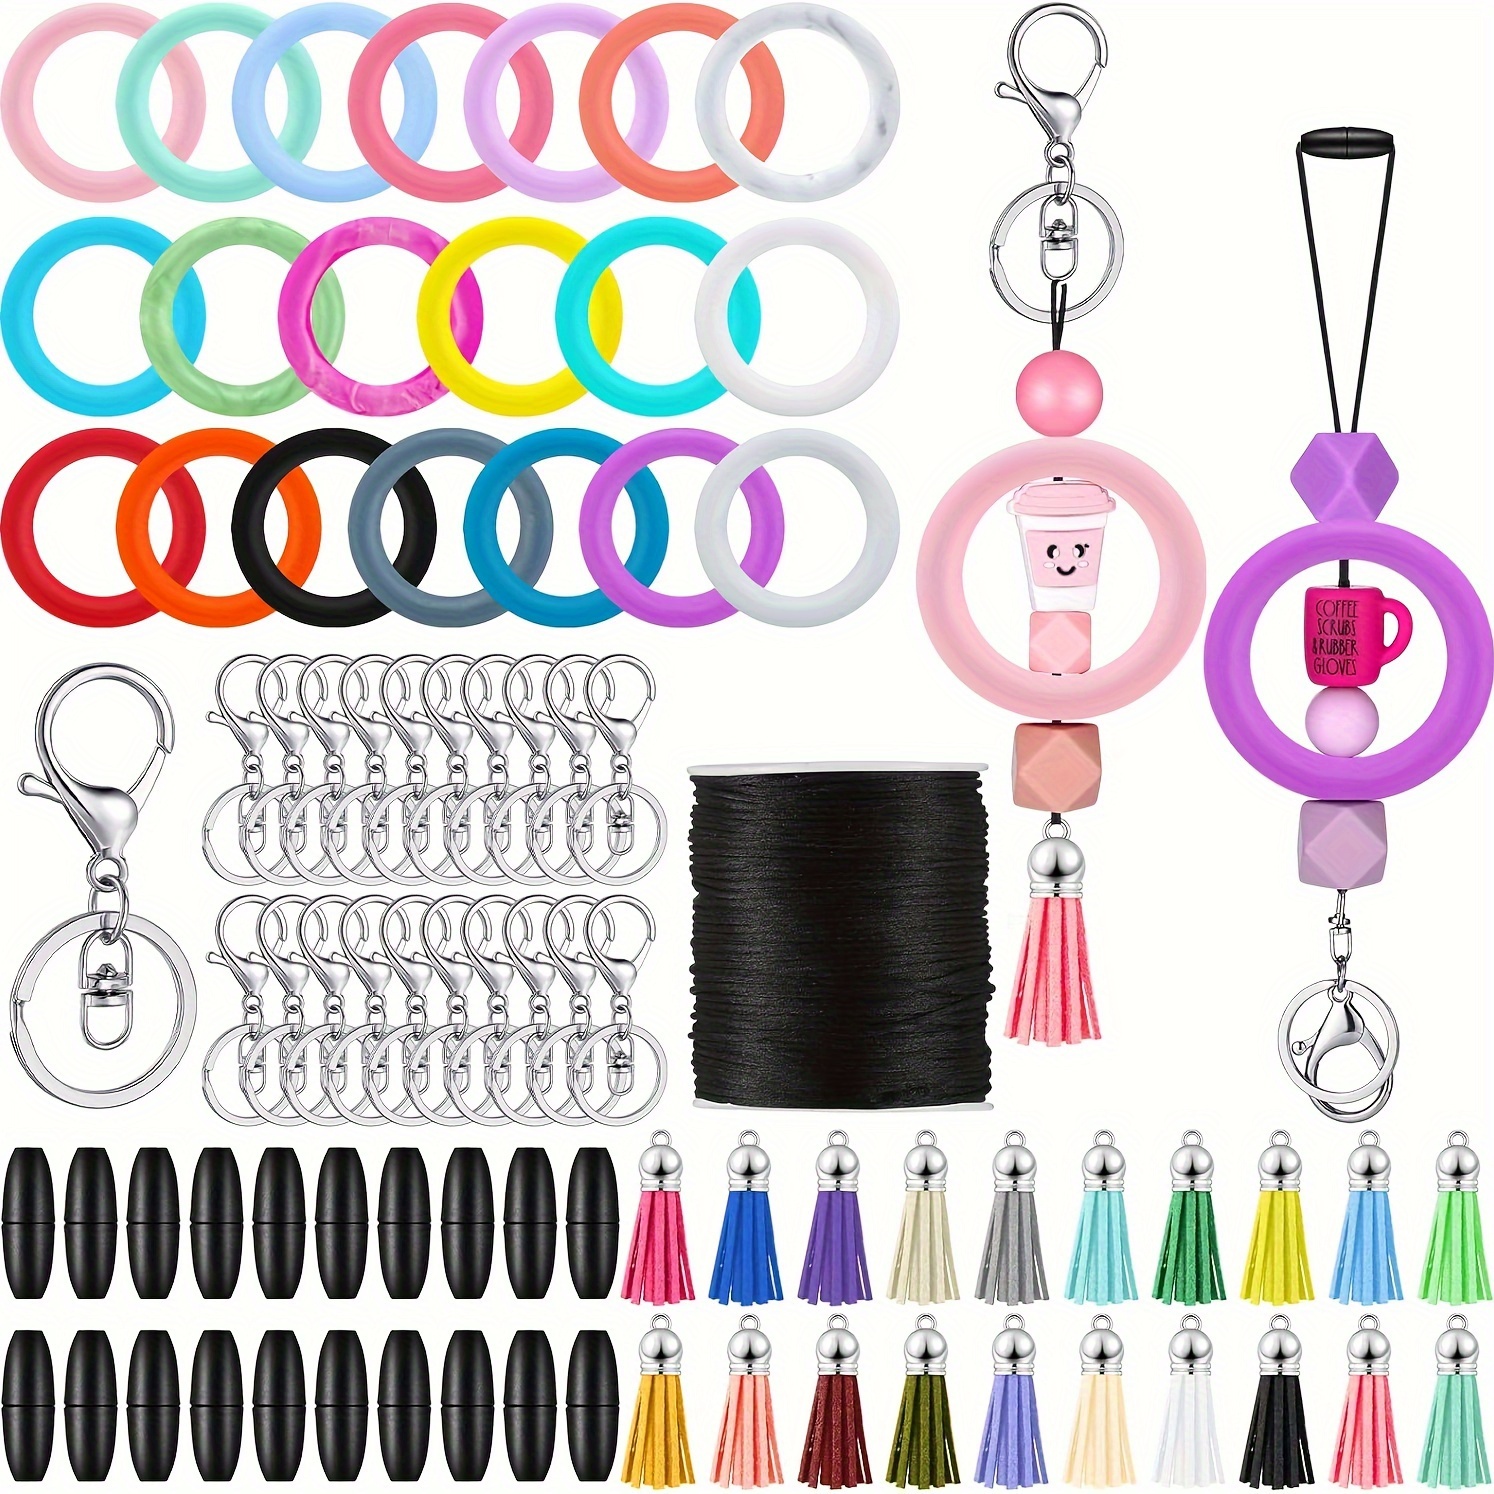 

81-piece Silicone Bead Keychain Making Kit - Diy Jewelry Craft Set With Colorful Beads, Rings & Pendants For Necklaces And Bracelets Charms For Jewelry Making Beads For Jewelry Making